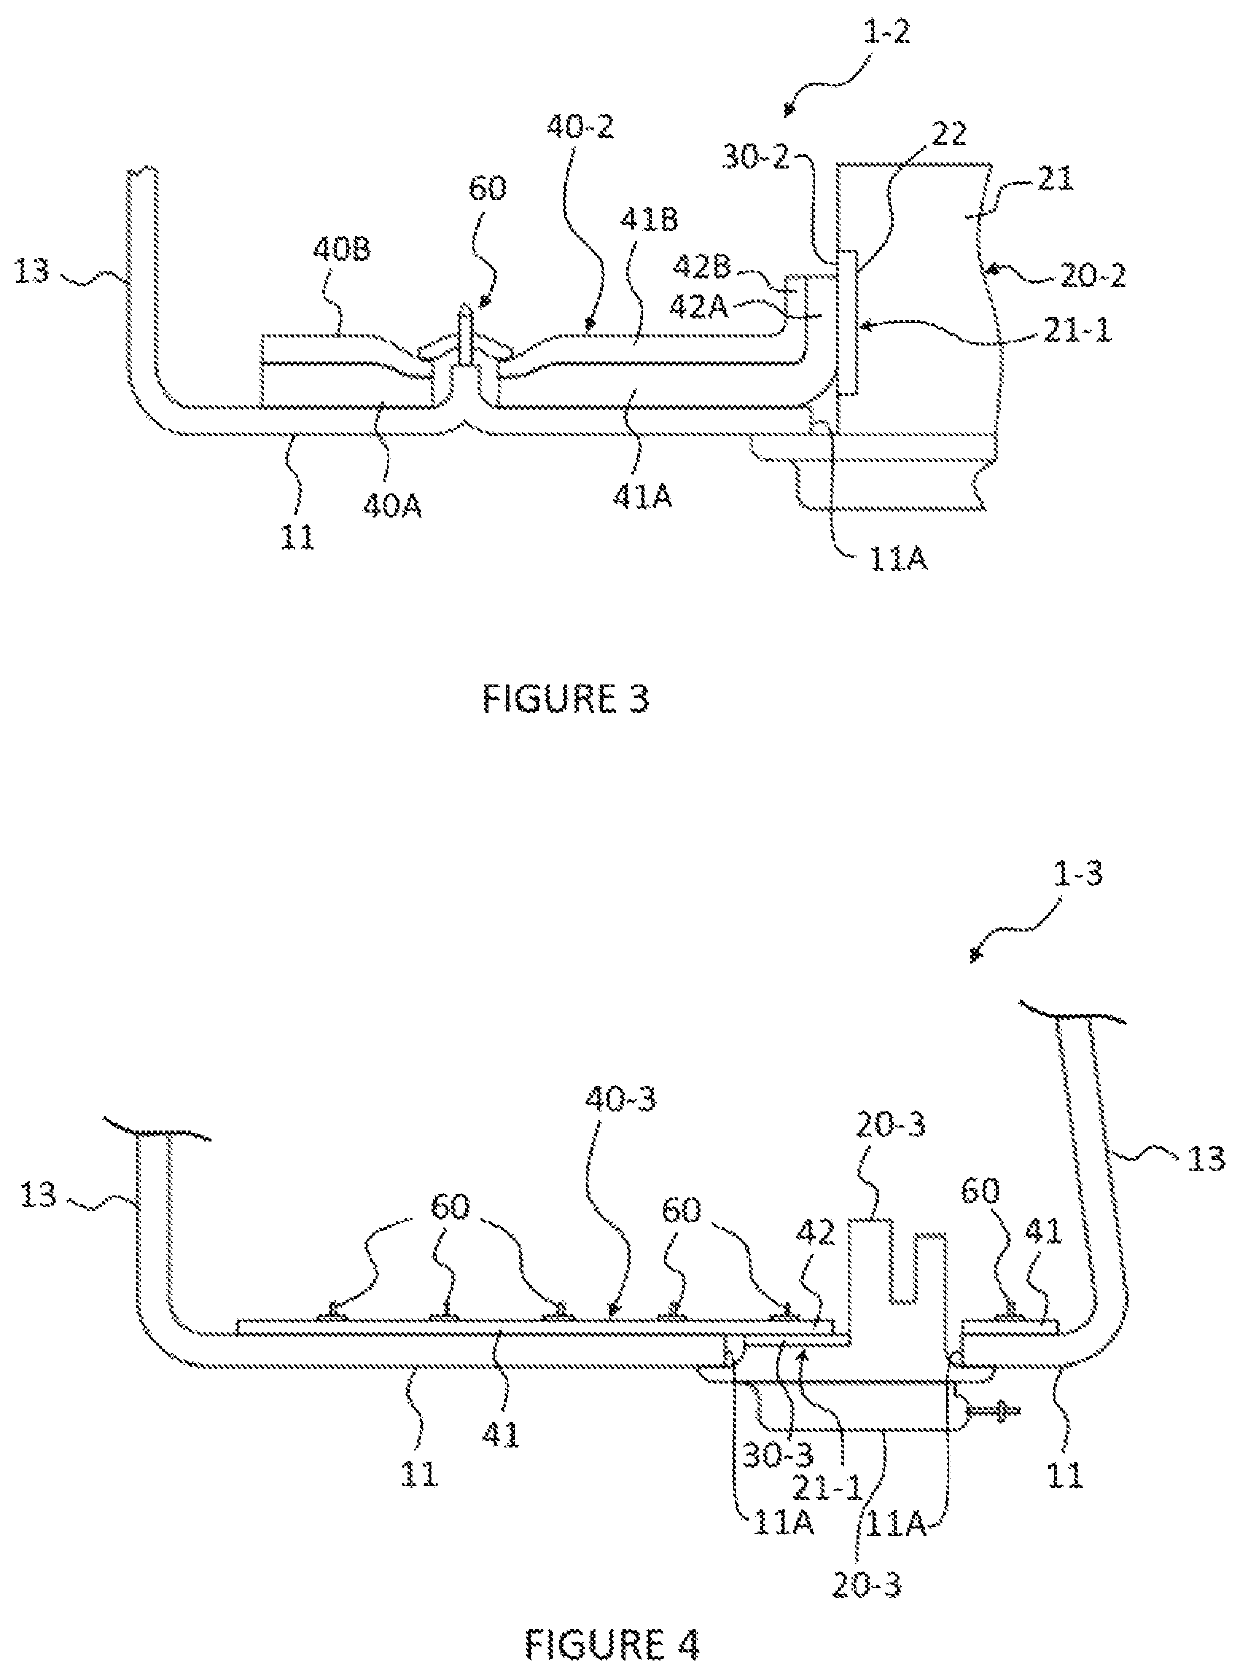 Liquid storage device for a motor vehicle